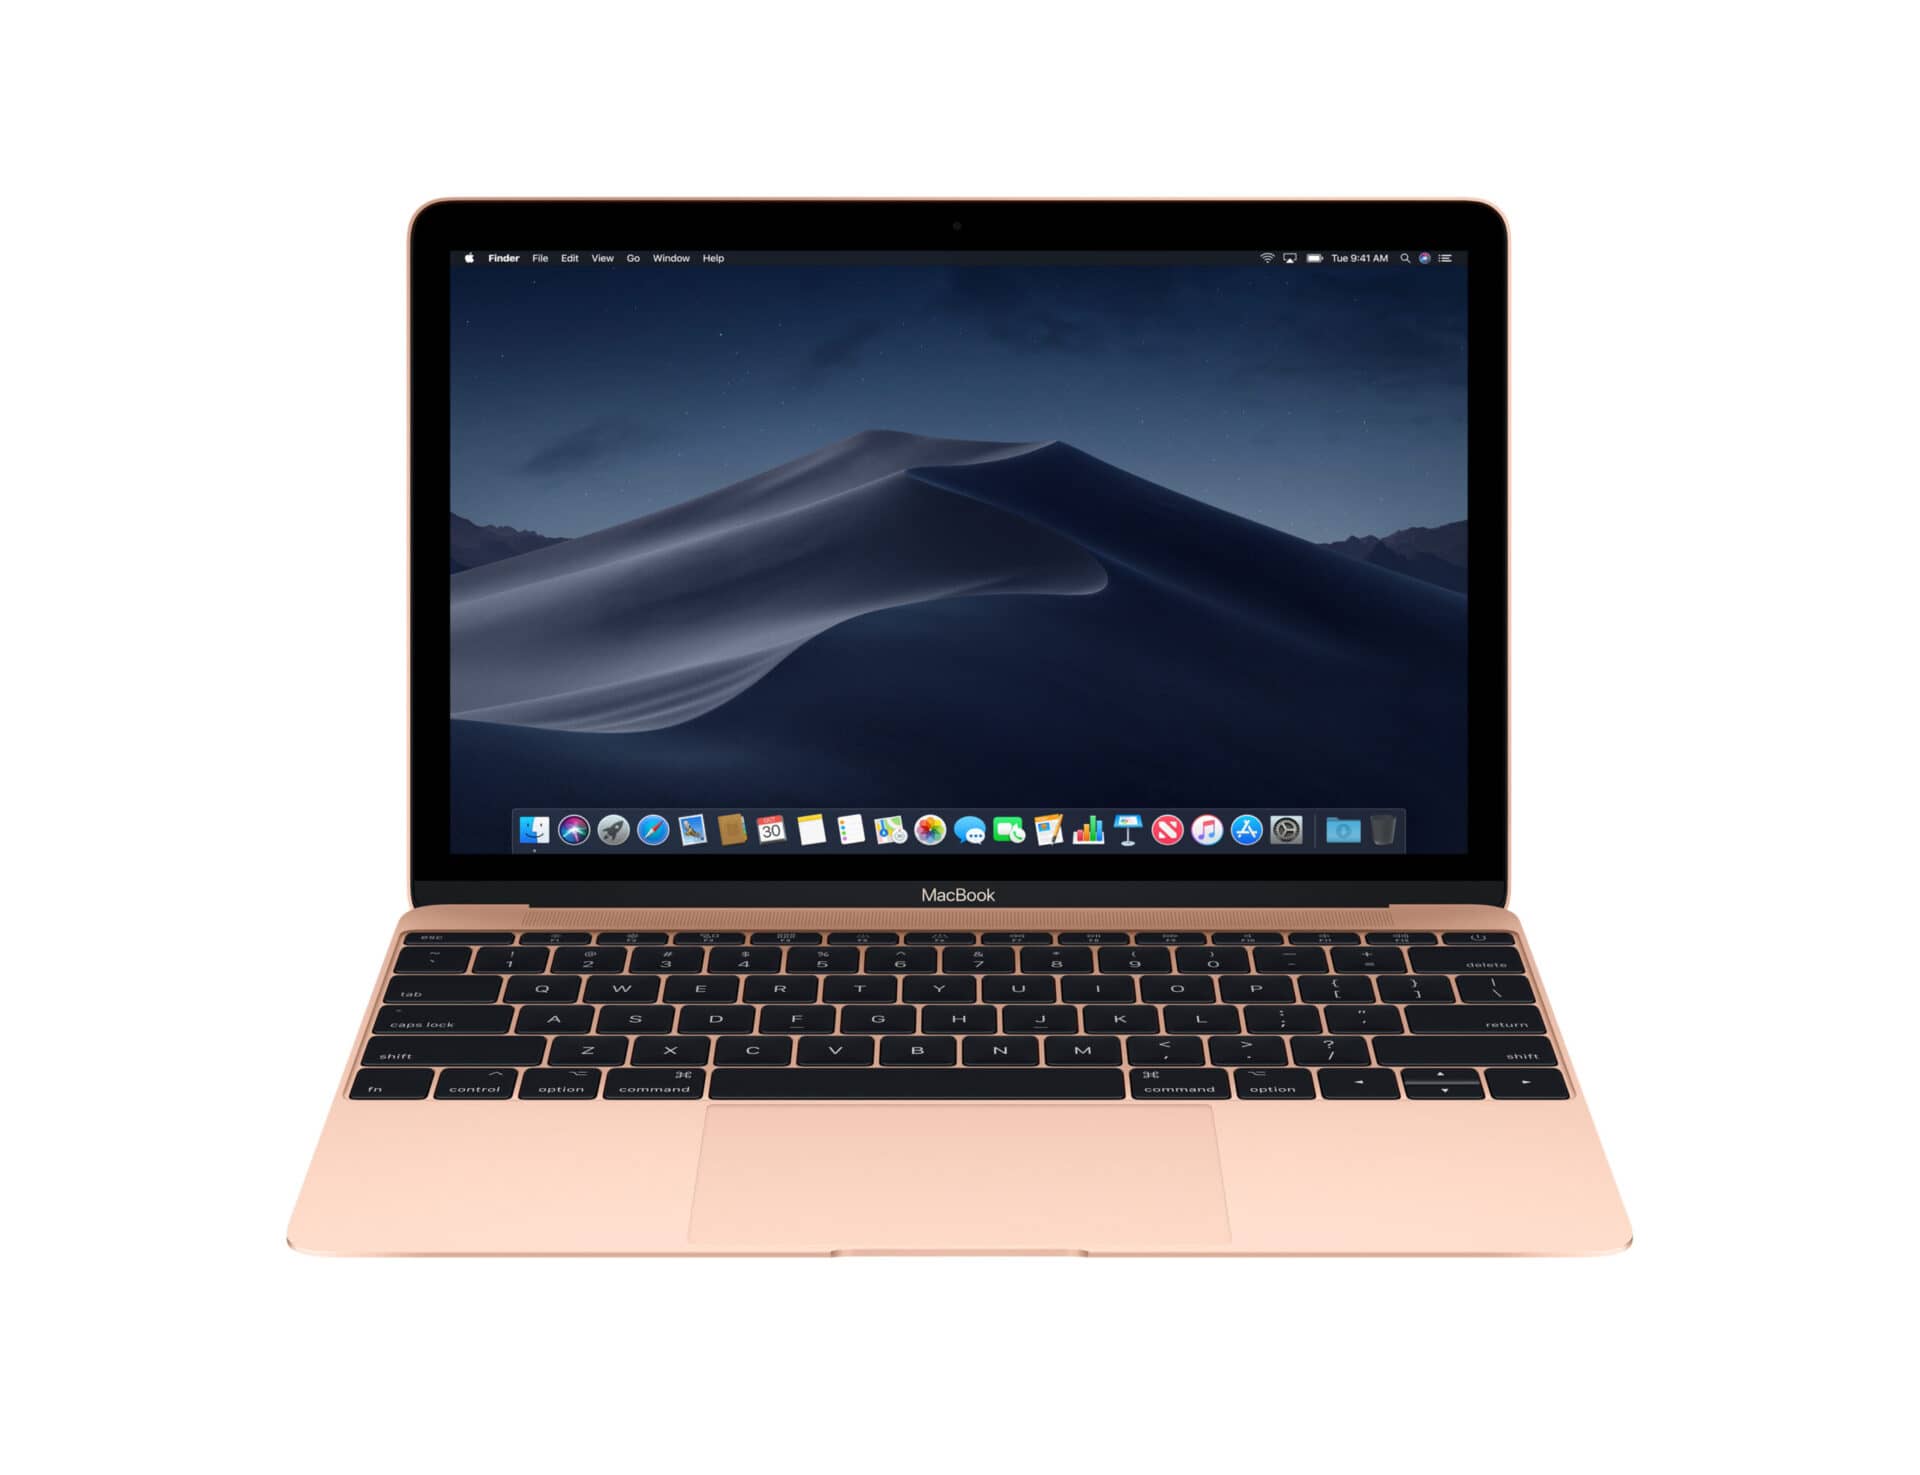 MacBook Retina 12 inch 2017 Intel core i5 Technical Specifications scaled